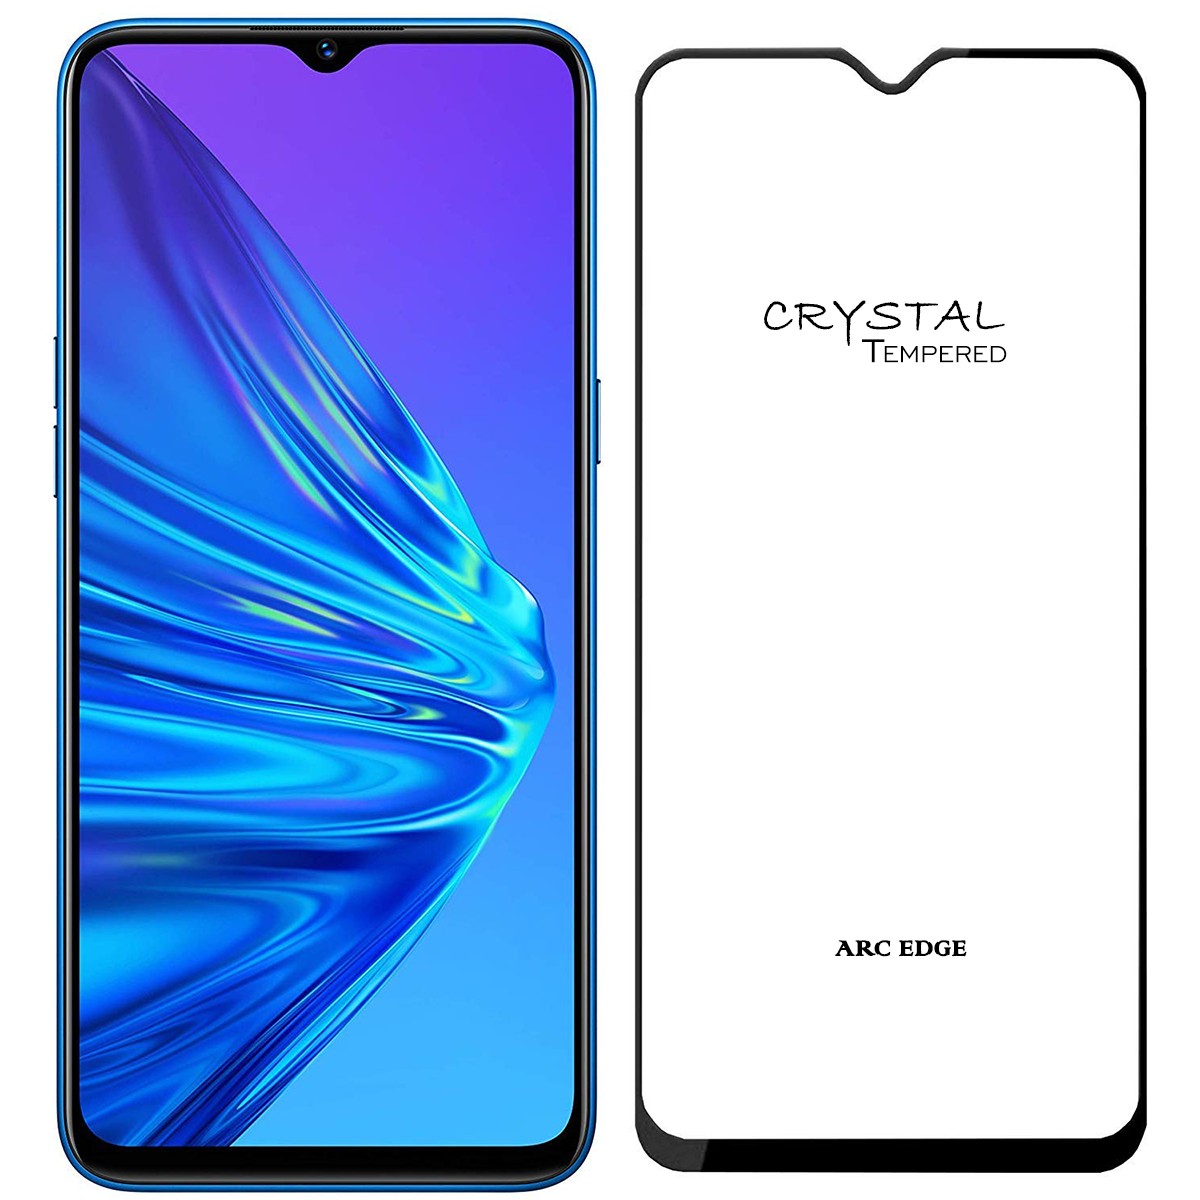 iFix Crystal 5D Tempered Glass for OPPO REALME X2 PRO/RENO ACE